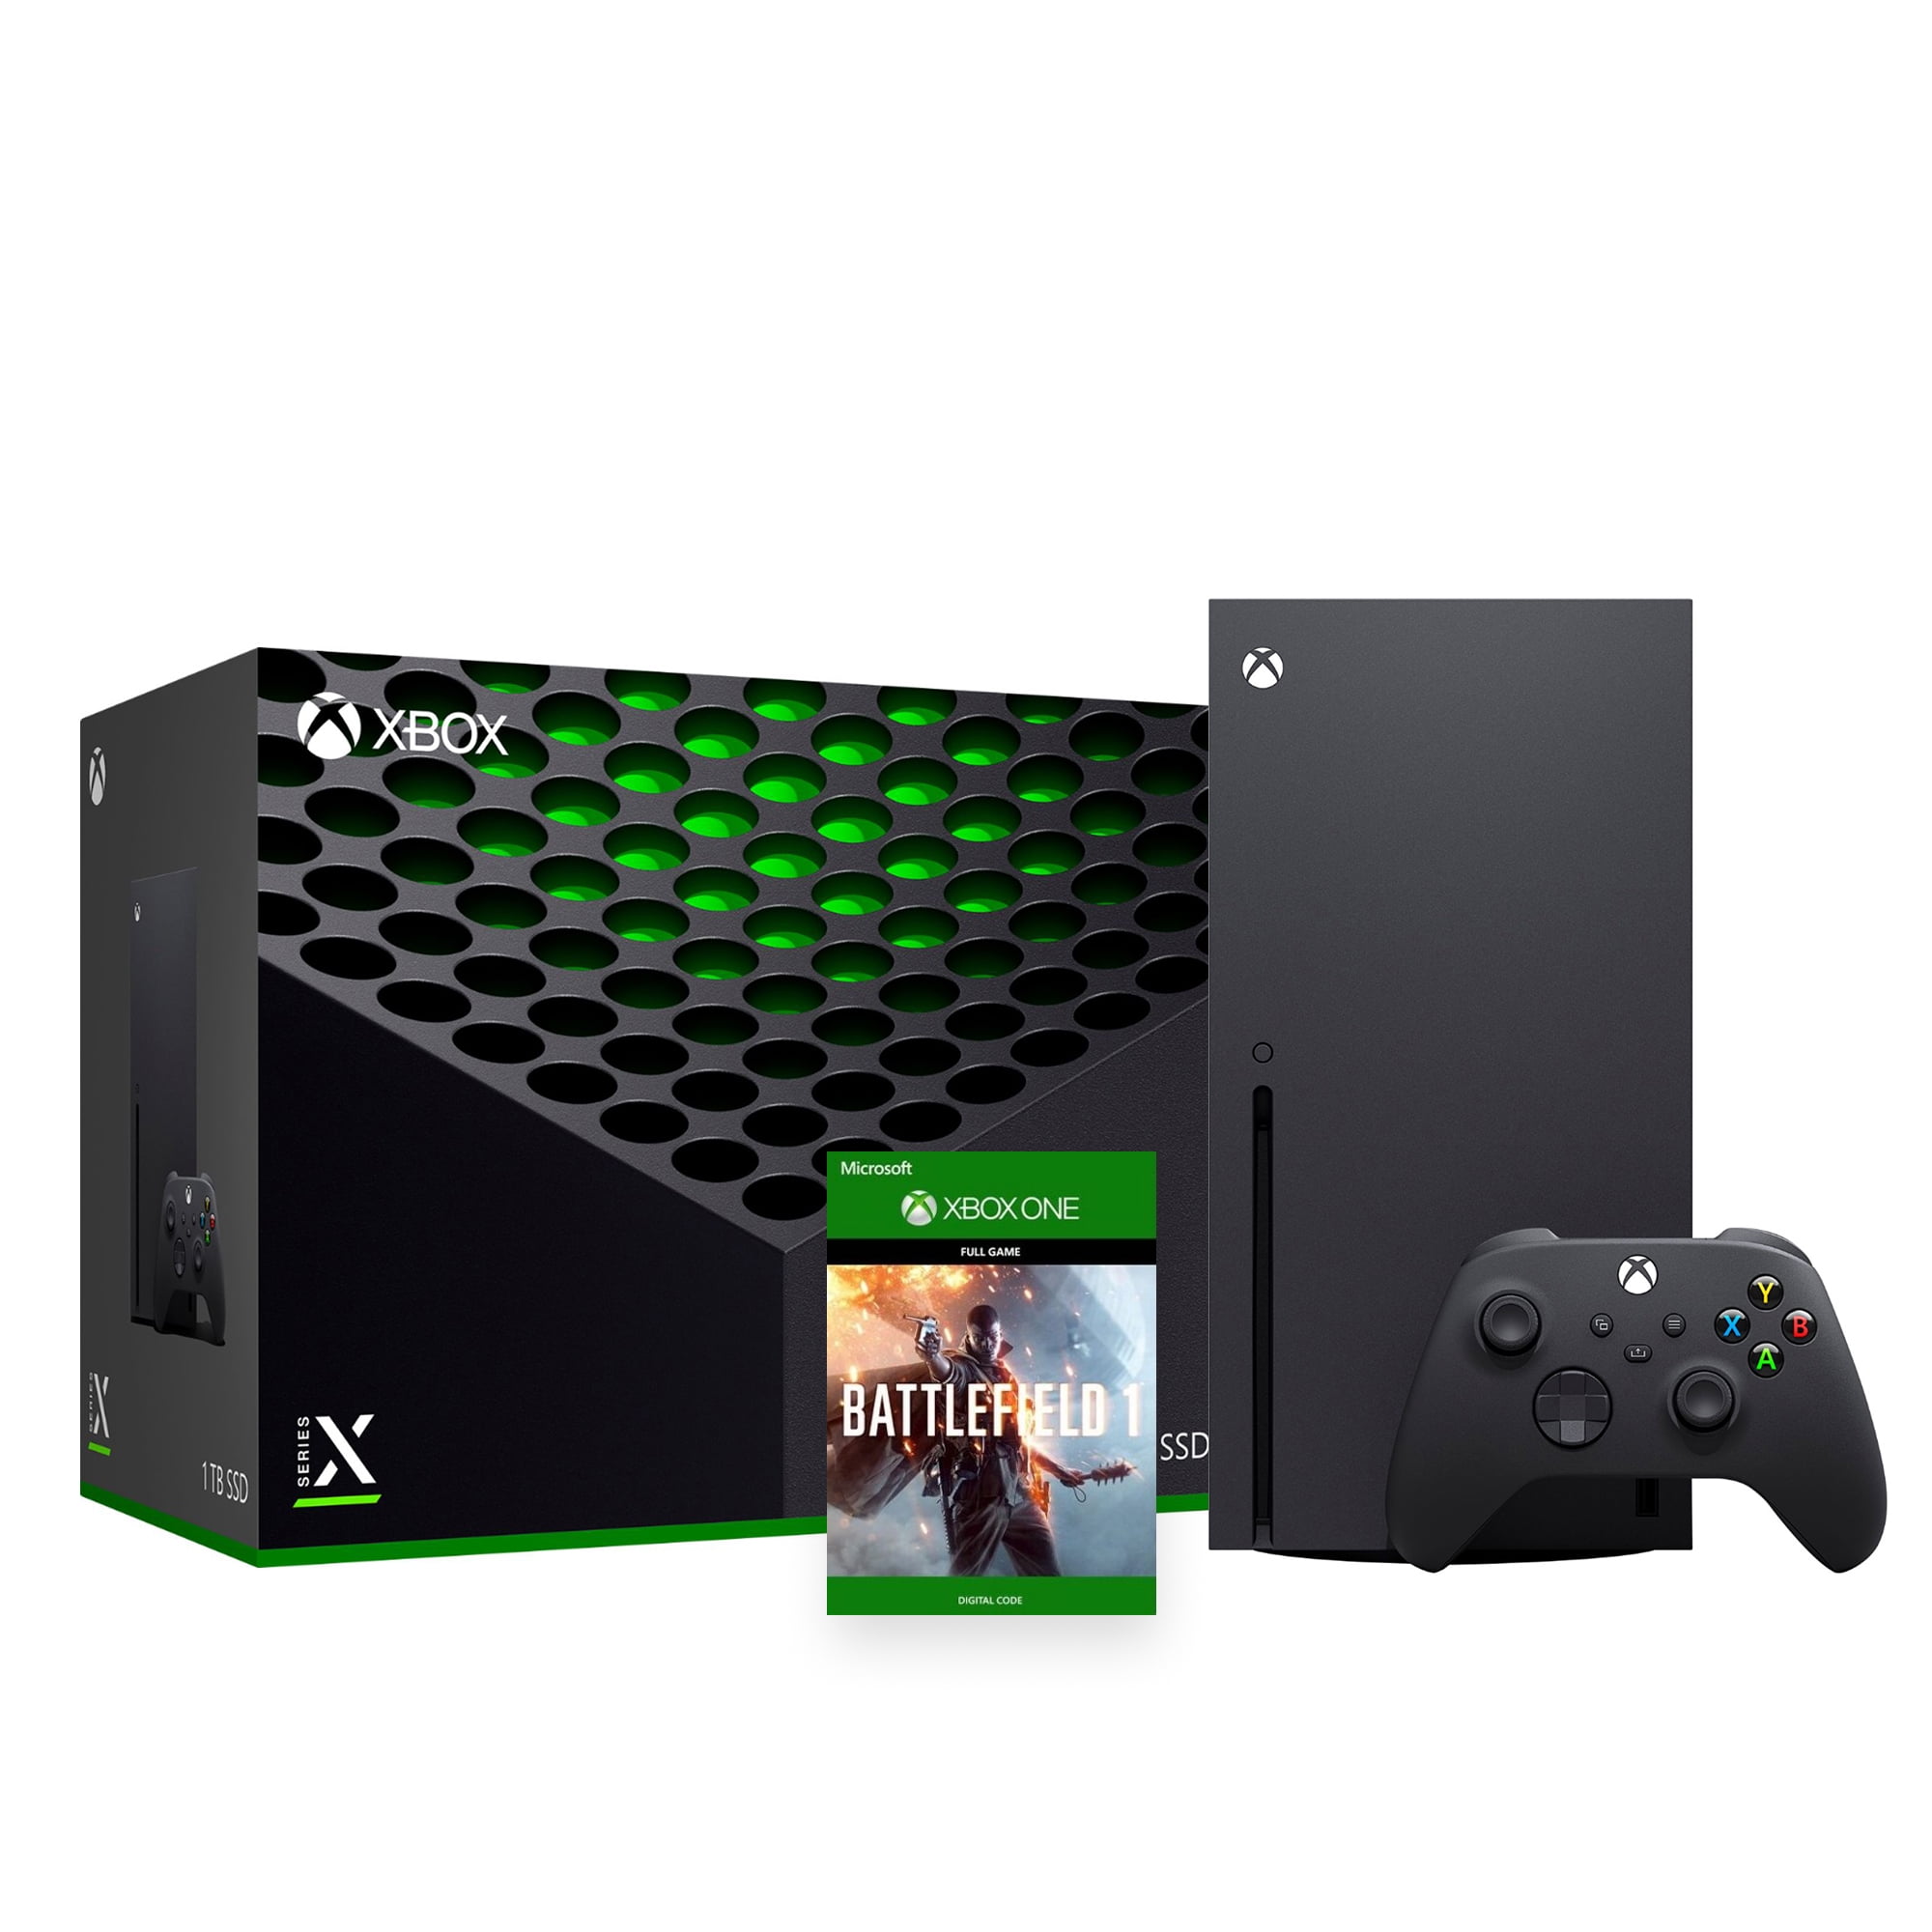 2020 Newest X Gaming Console Bundle - 1TB SSD Black Xbox Console and Wireless with PUBG Full Game - Walmart.com